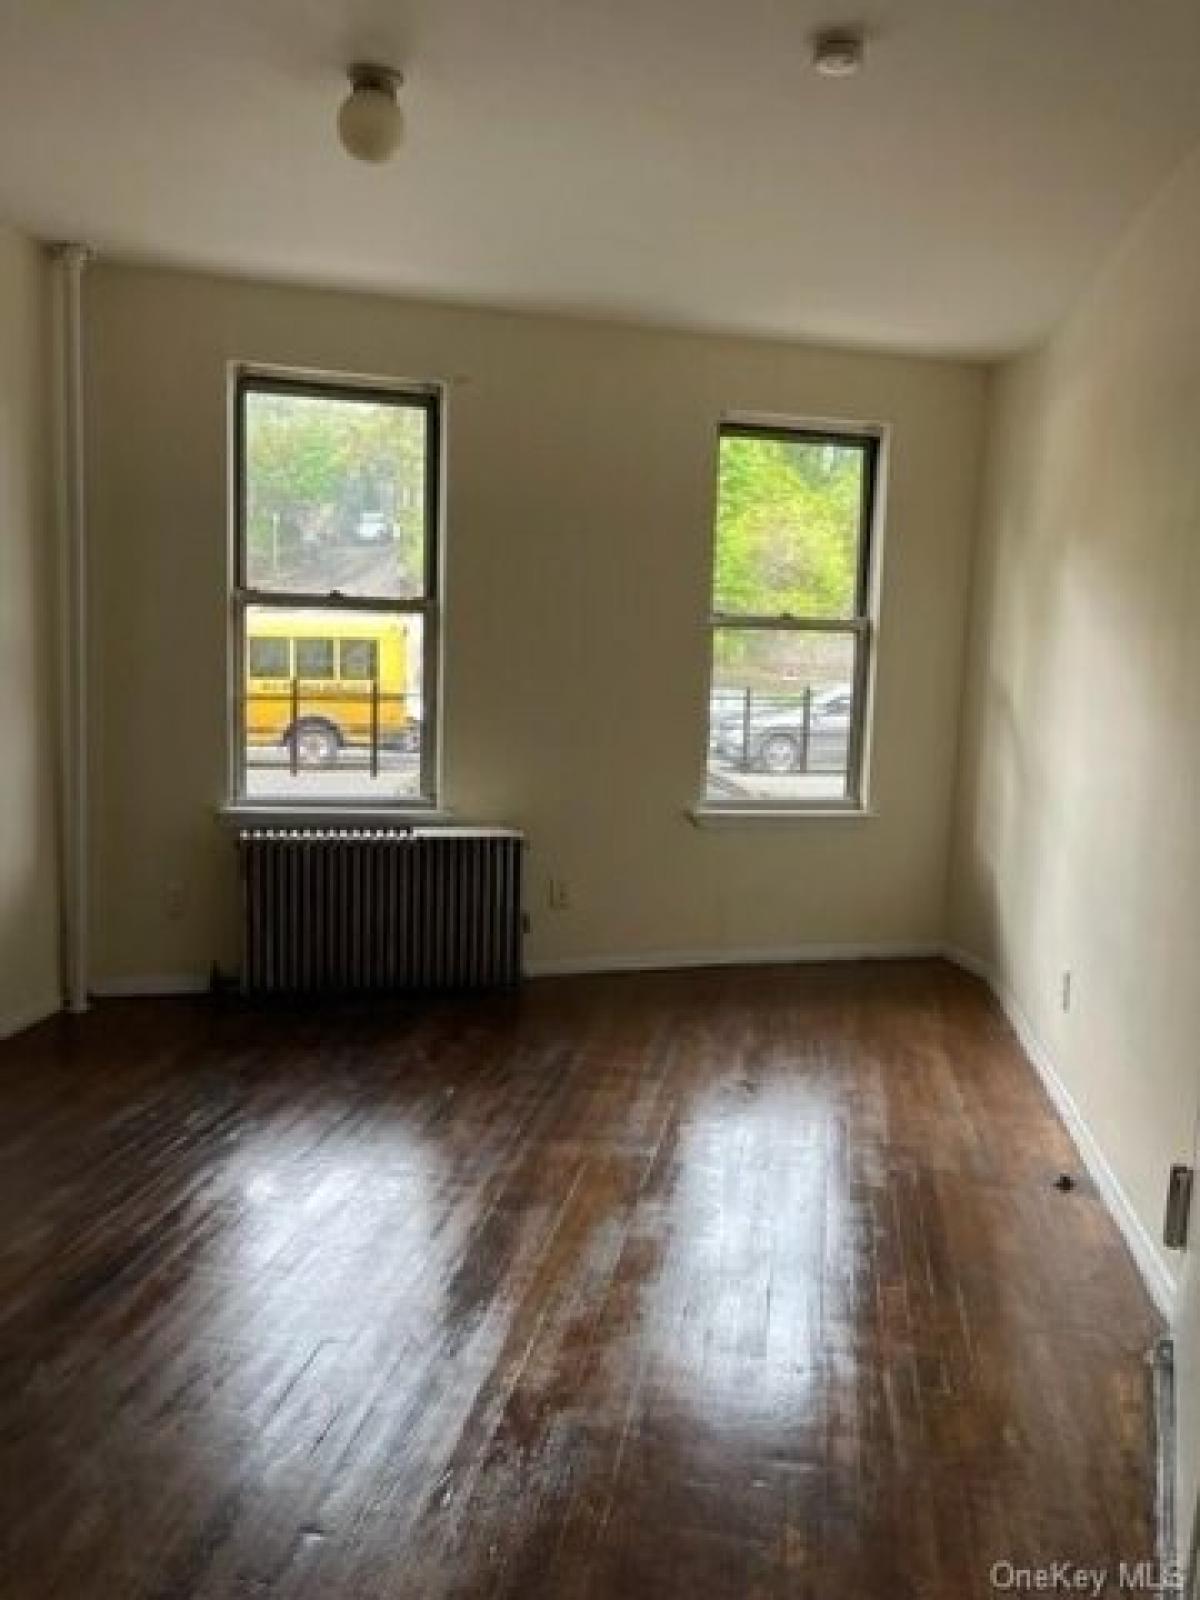 Picture of Apartment For Rent in Yonkers, New York, United States